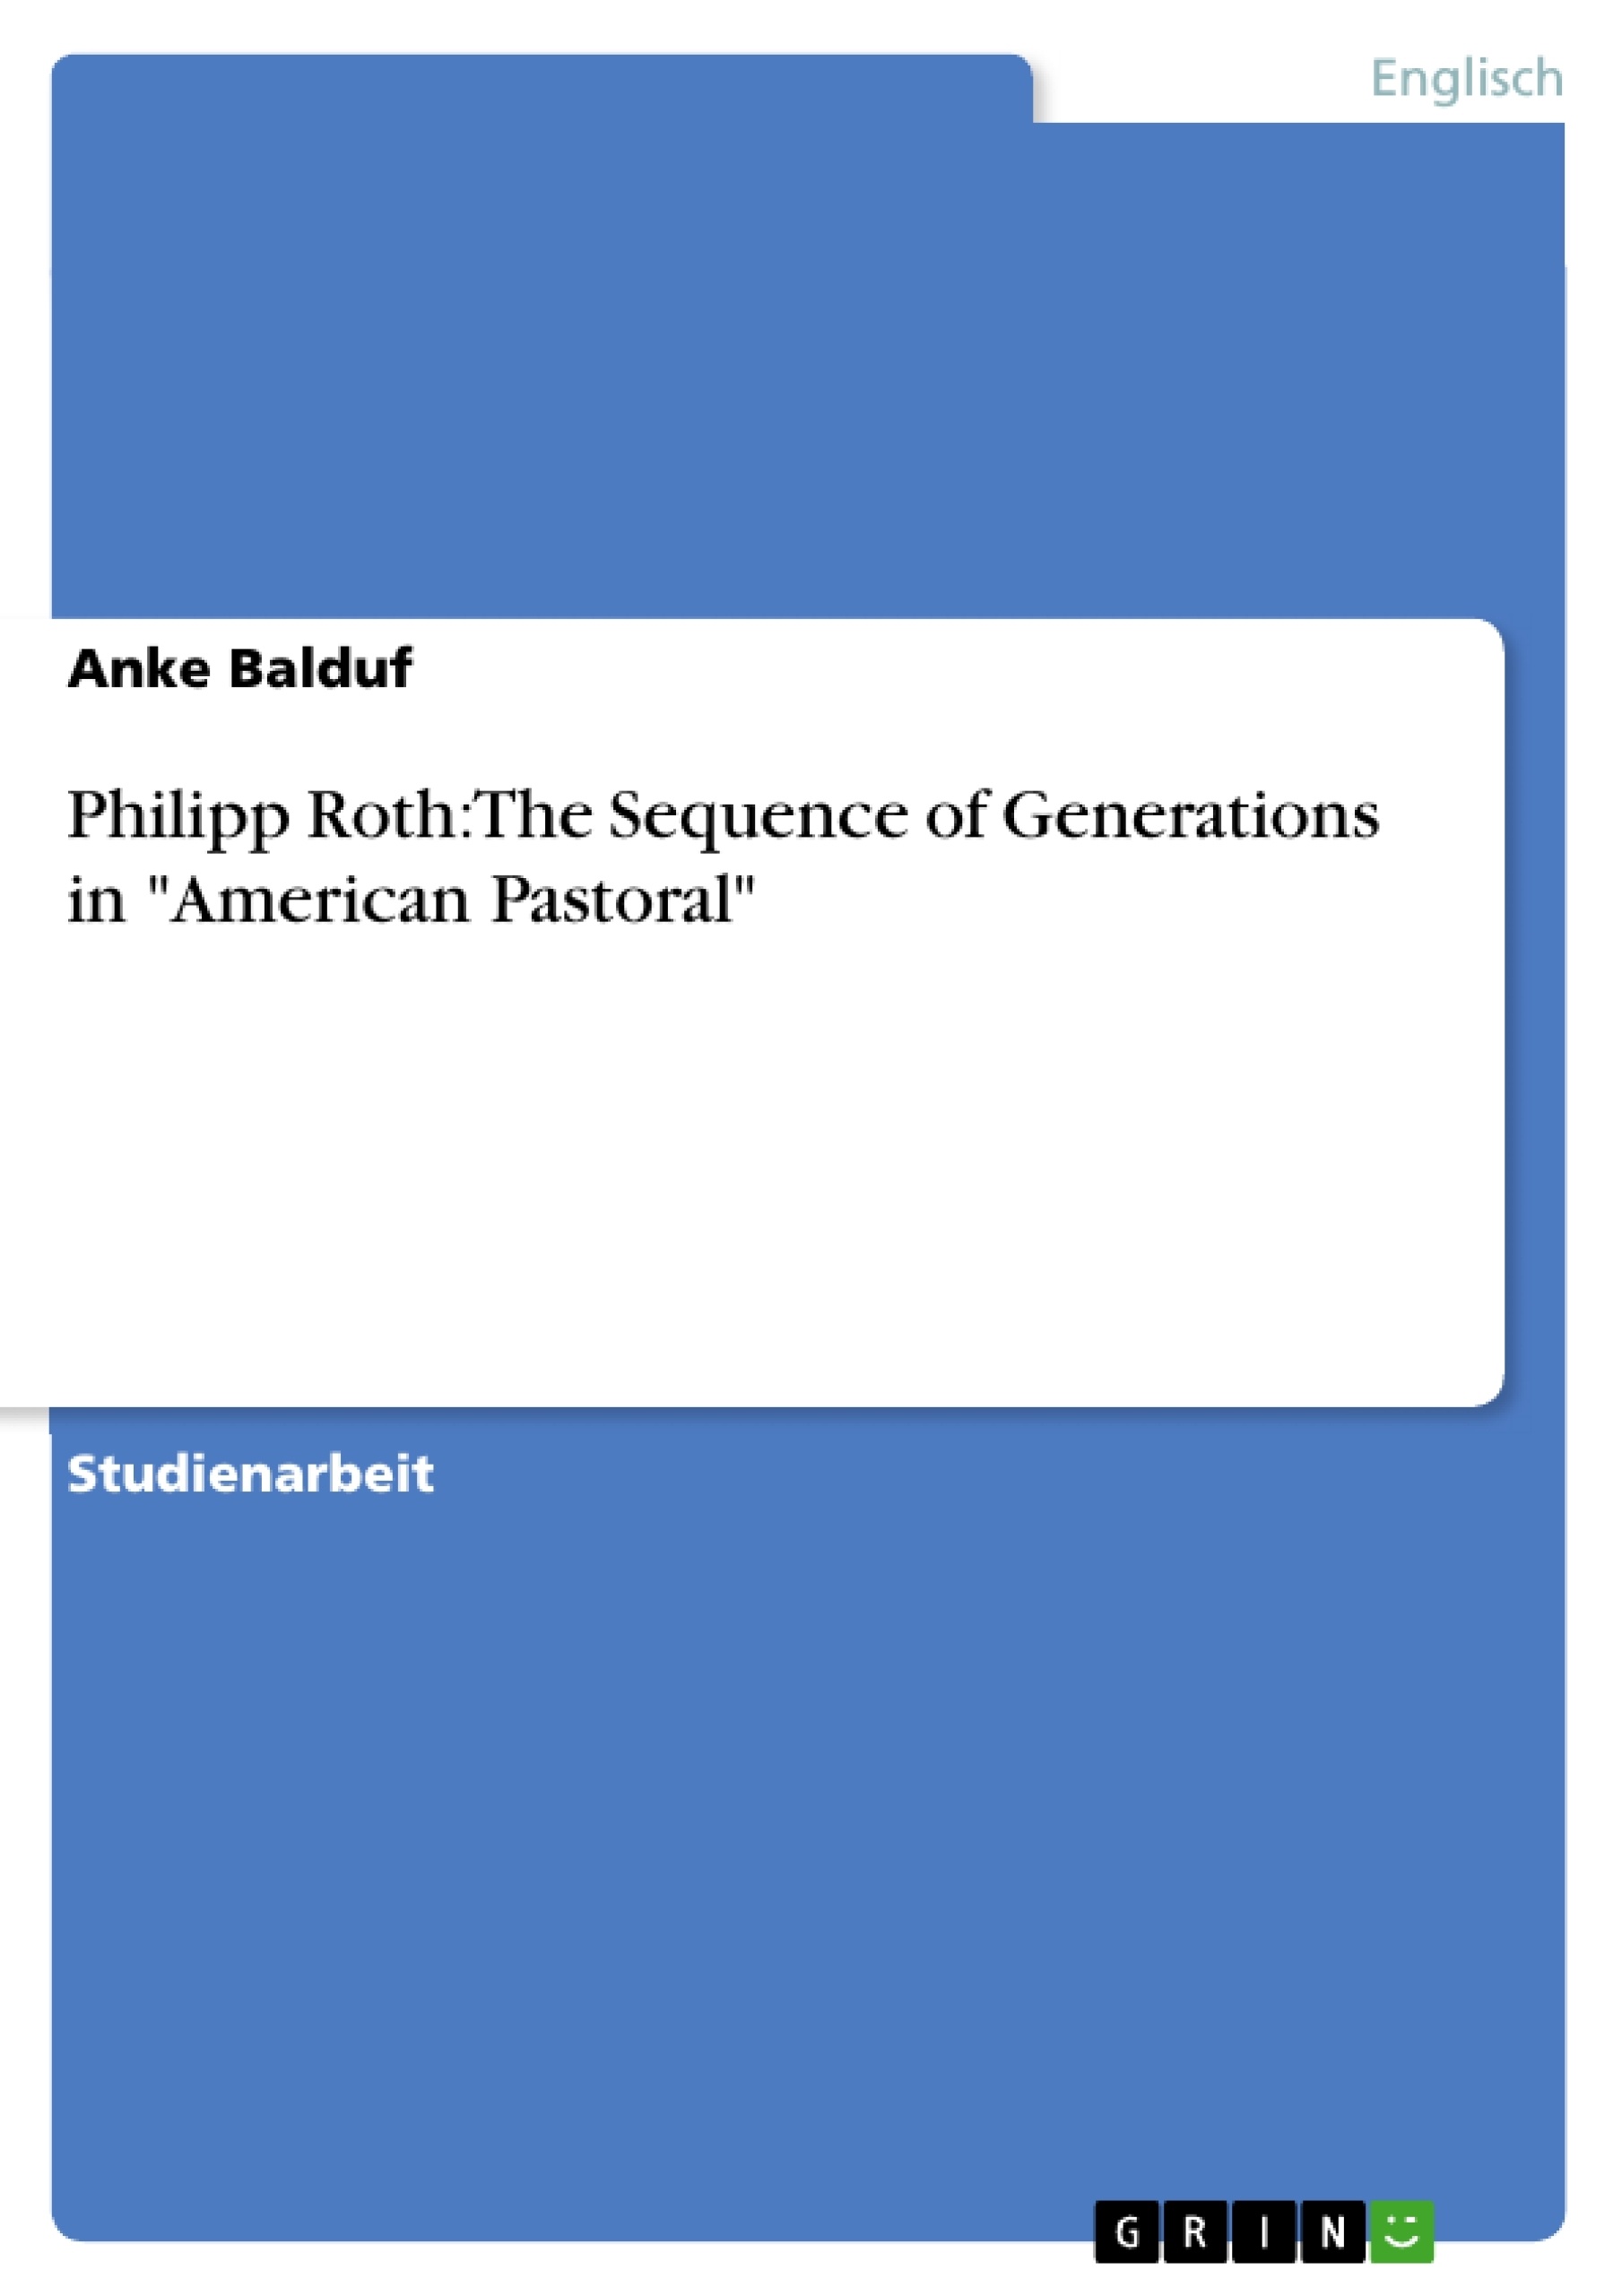 Title: Philipp Roth: The Sequence of Generations in "American Pastoral"